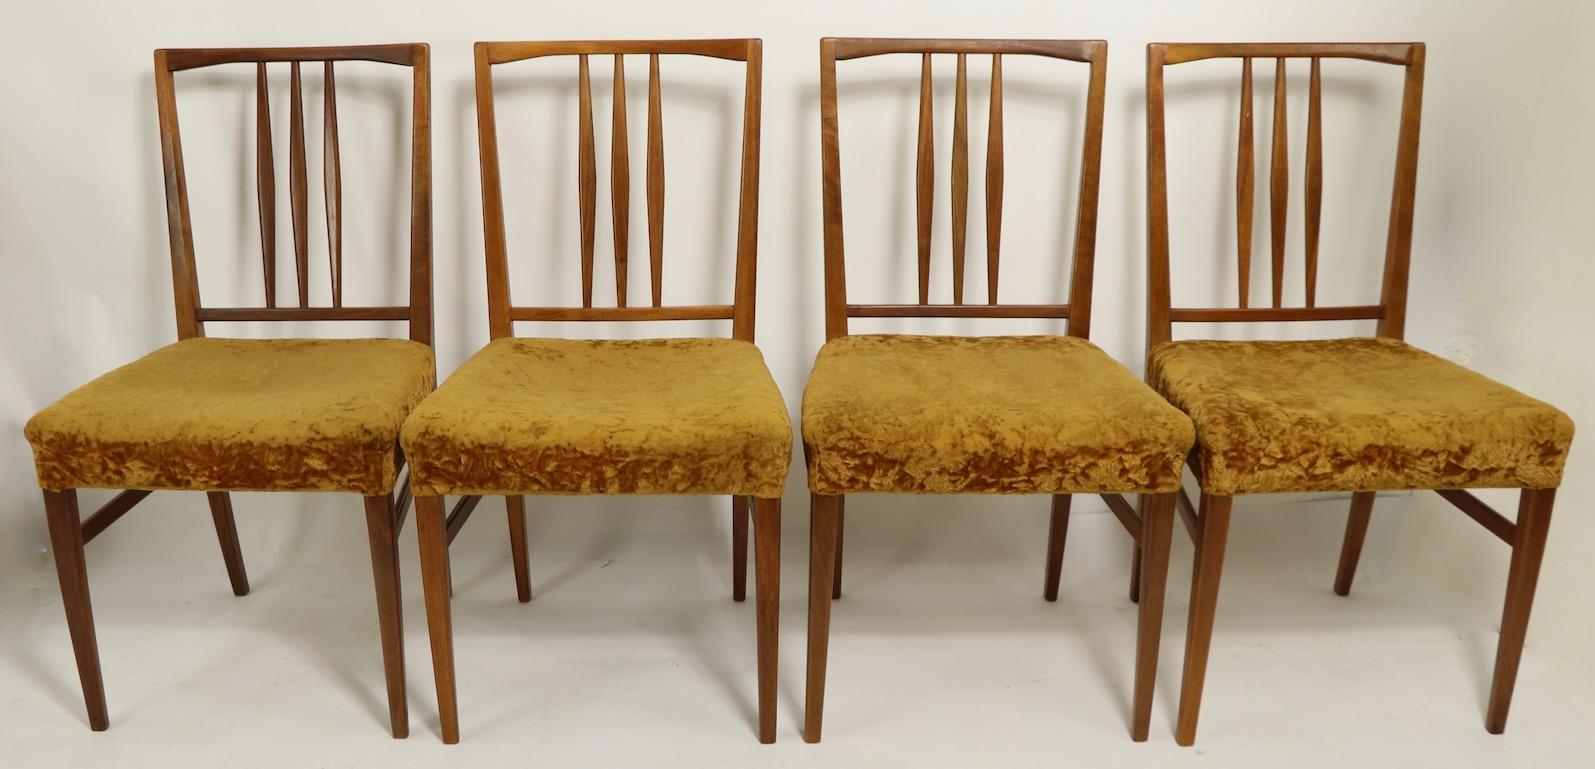 Elegant and graceful set of 4 dining chairs made by Gimson and Slater of England, and retailed by Heals London. The chairs have elongated sculpted diamond form back supports, and light and graceful frames, which are deceptively strong and sturdy.